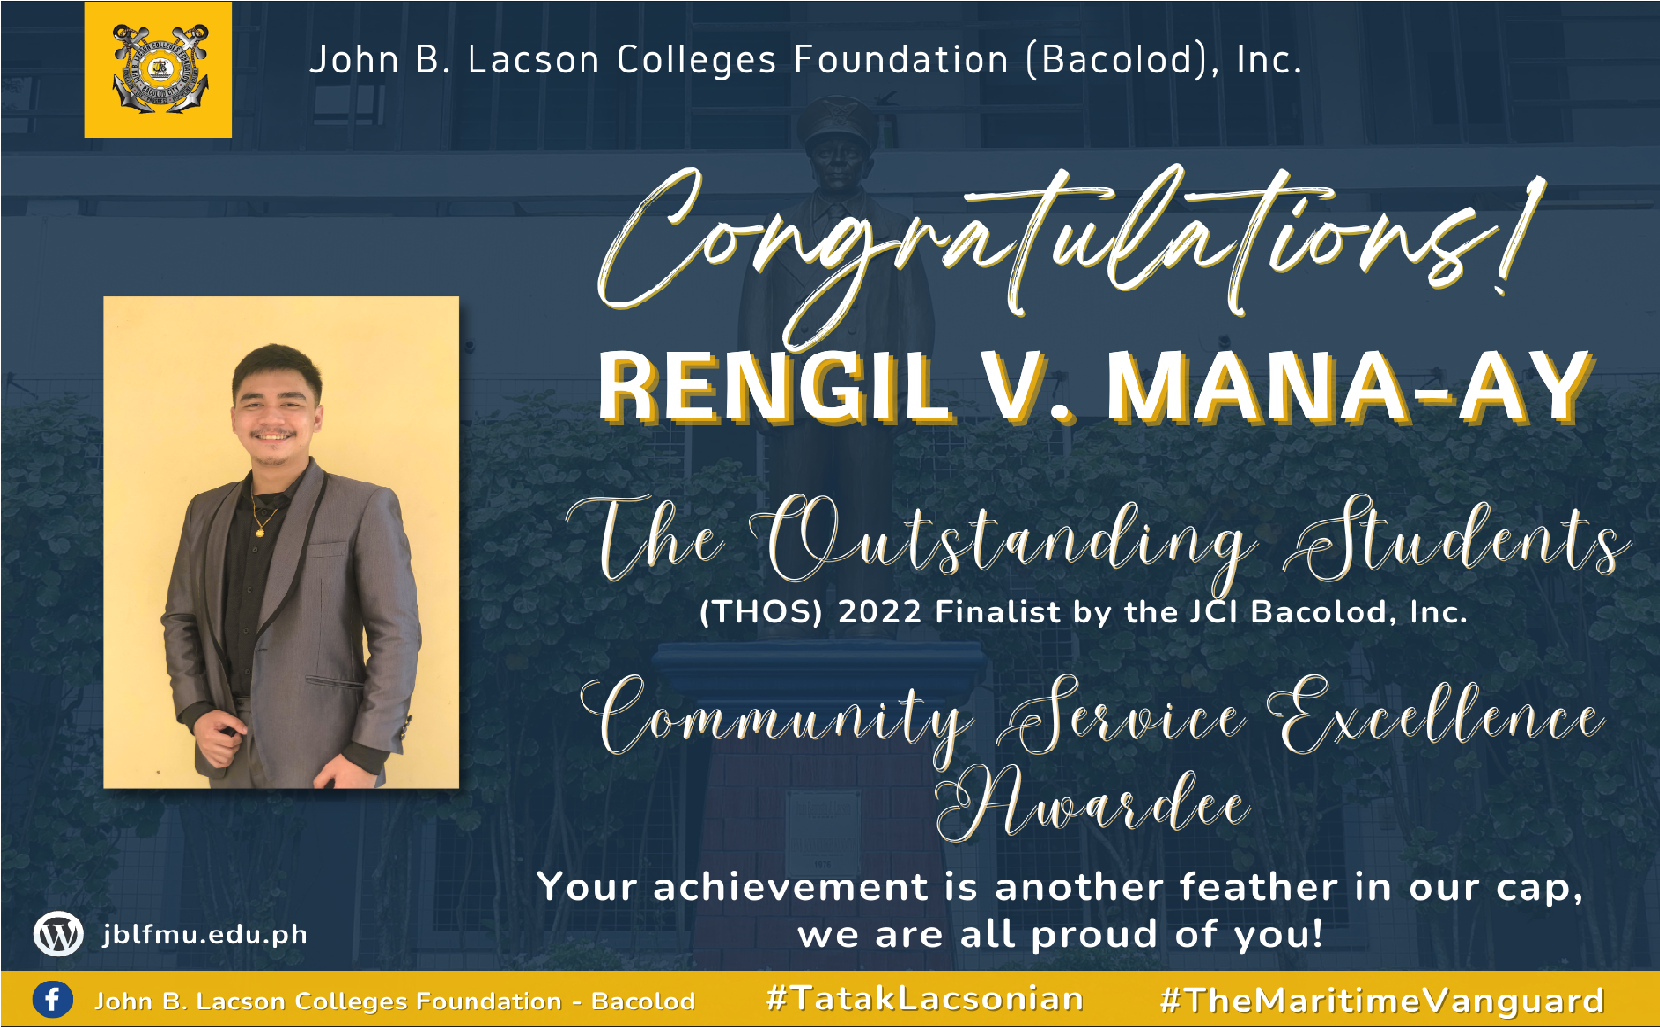 Mana-ay, Rengil V. named as a finalist of the 2022 The Outstanding Students (THOS) and received the Community Service Excellence Award by JCI Bacolod